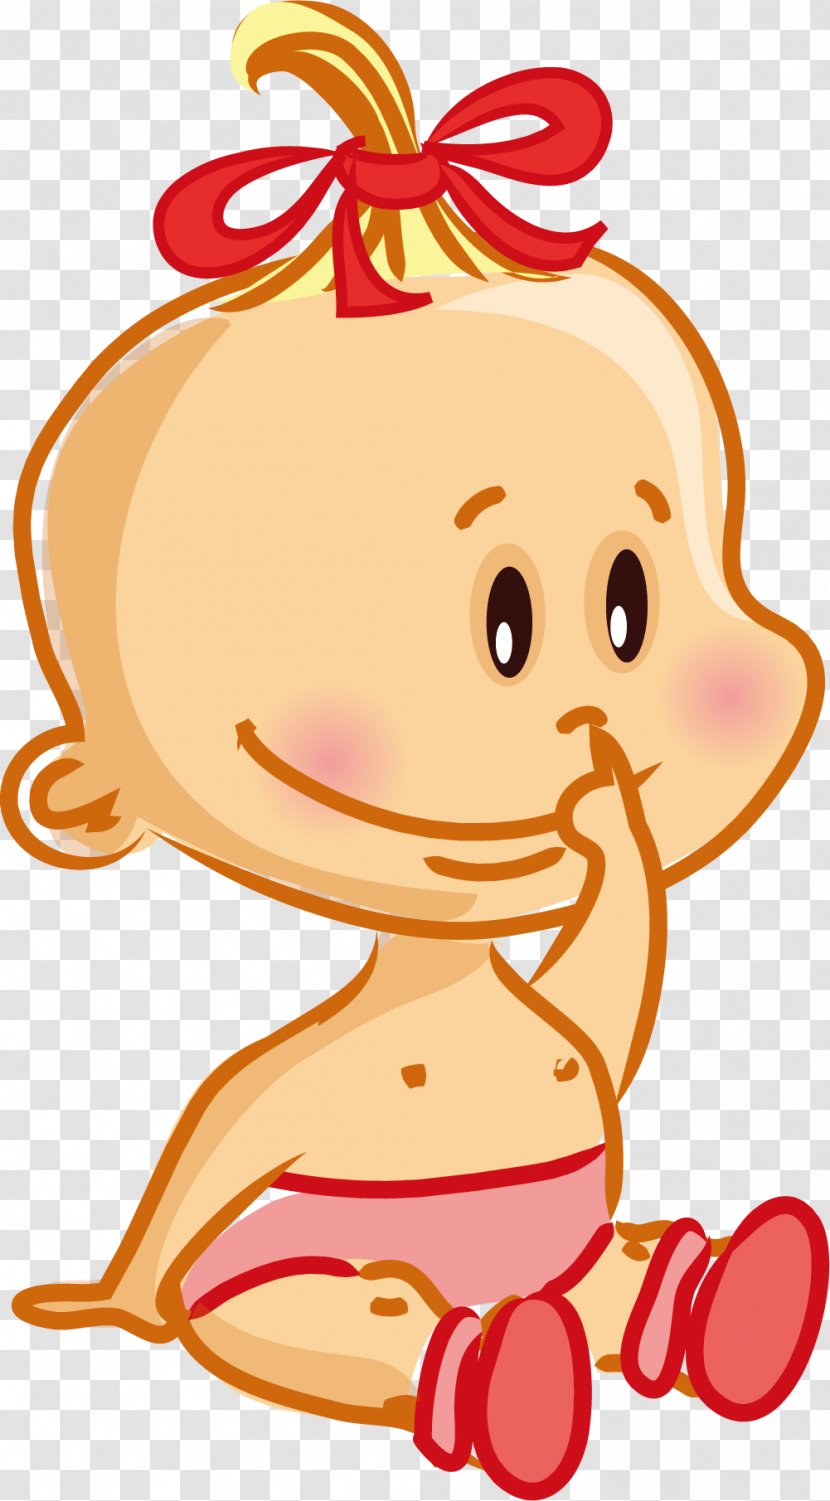 Infant Pregnancy Boy Illustration - Tree - Hand Painted Baby Transparent PNG